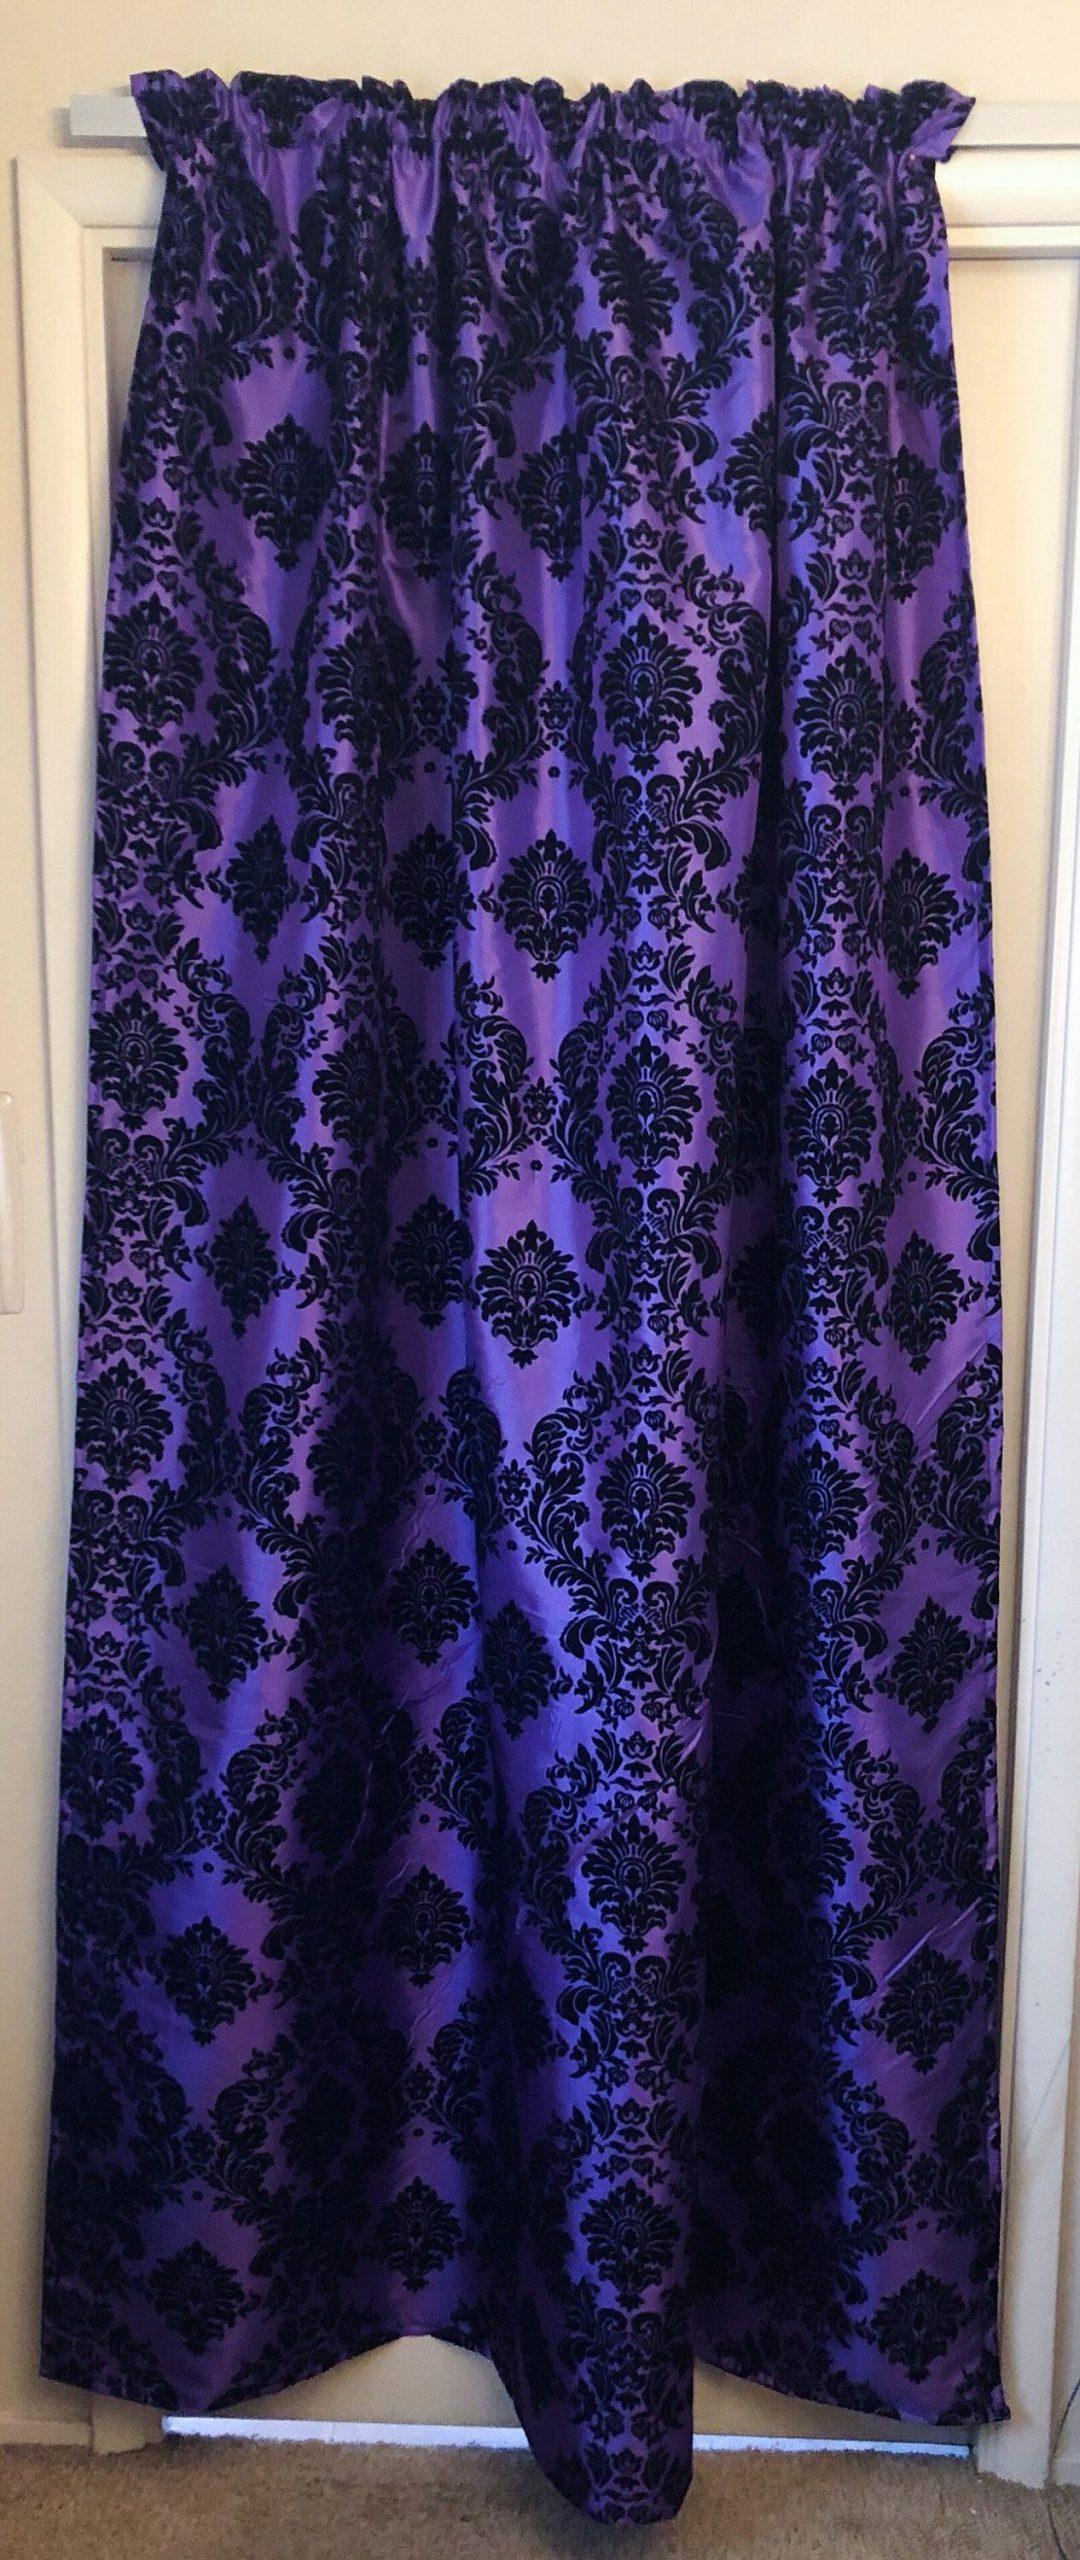 Damask curtains damask curtain panels gothic curtains victorian curtains purple black